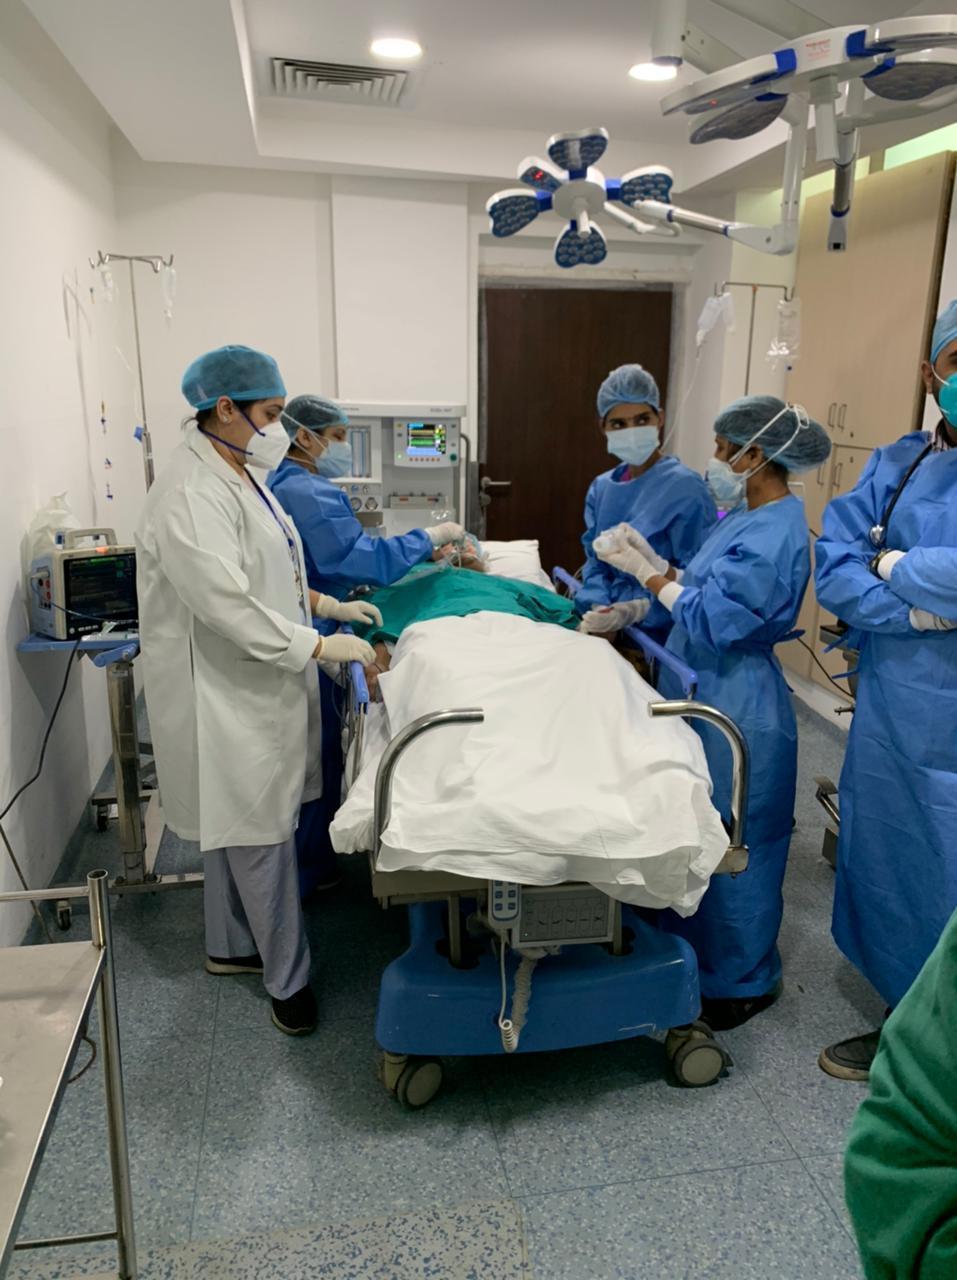 Dr. Rimy Dey (left) treats COVID-19 patients in the emergency room of a private hospital in Gurugram, a suburb of New Delhi.